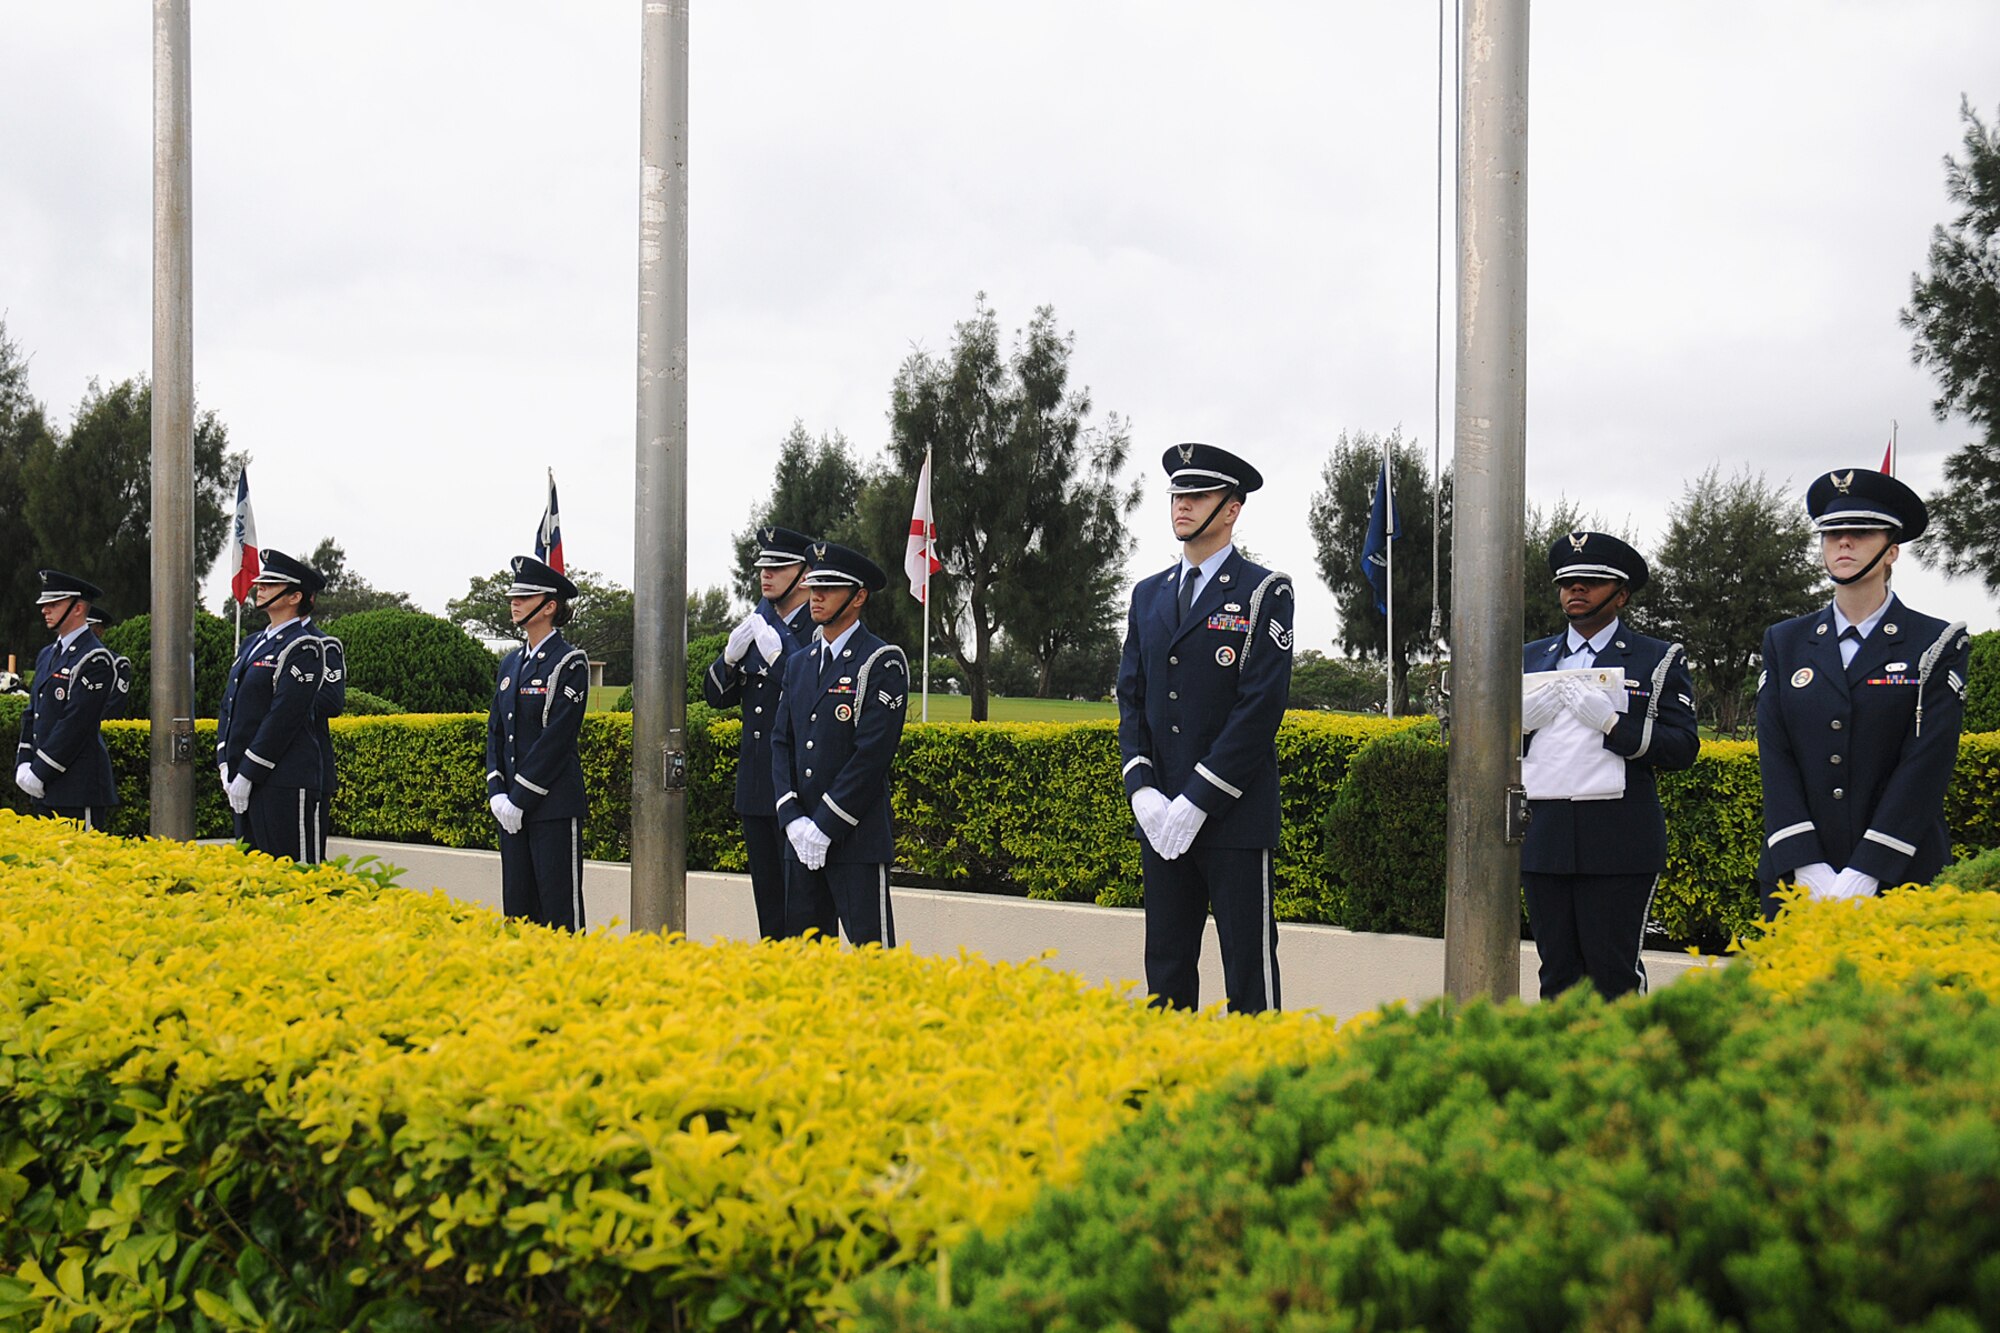 Airmen of the Kadena Air Base Honor Guard prepare to raise the flags during
the Veteran's Day Ceremony held Nov. 11, 2008. The ceremony was held to
honor all who have served in defense of the United States of America. (U.S.
Air Force photo/Airman 1st Class Chad Warren)
